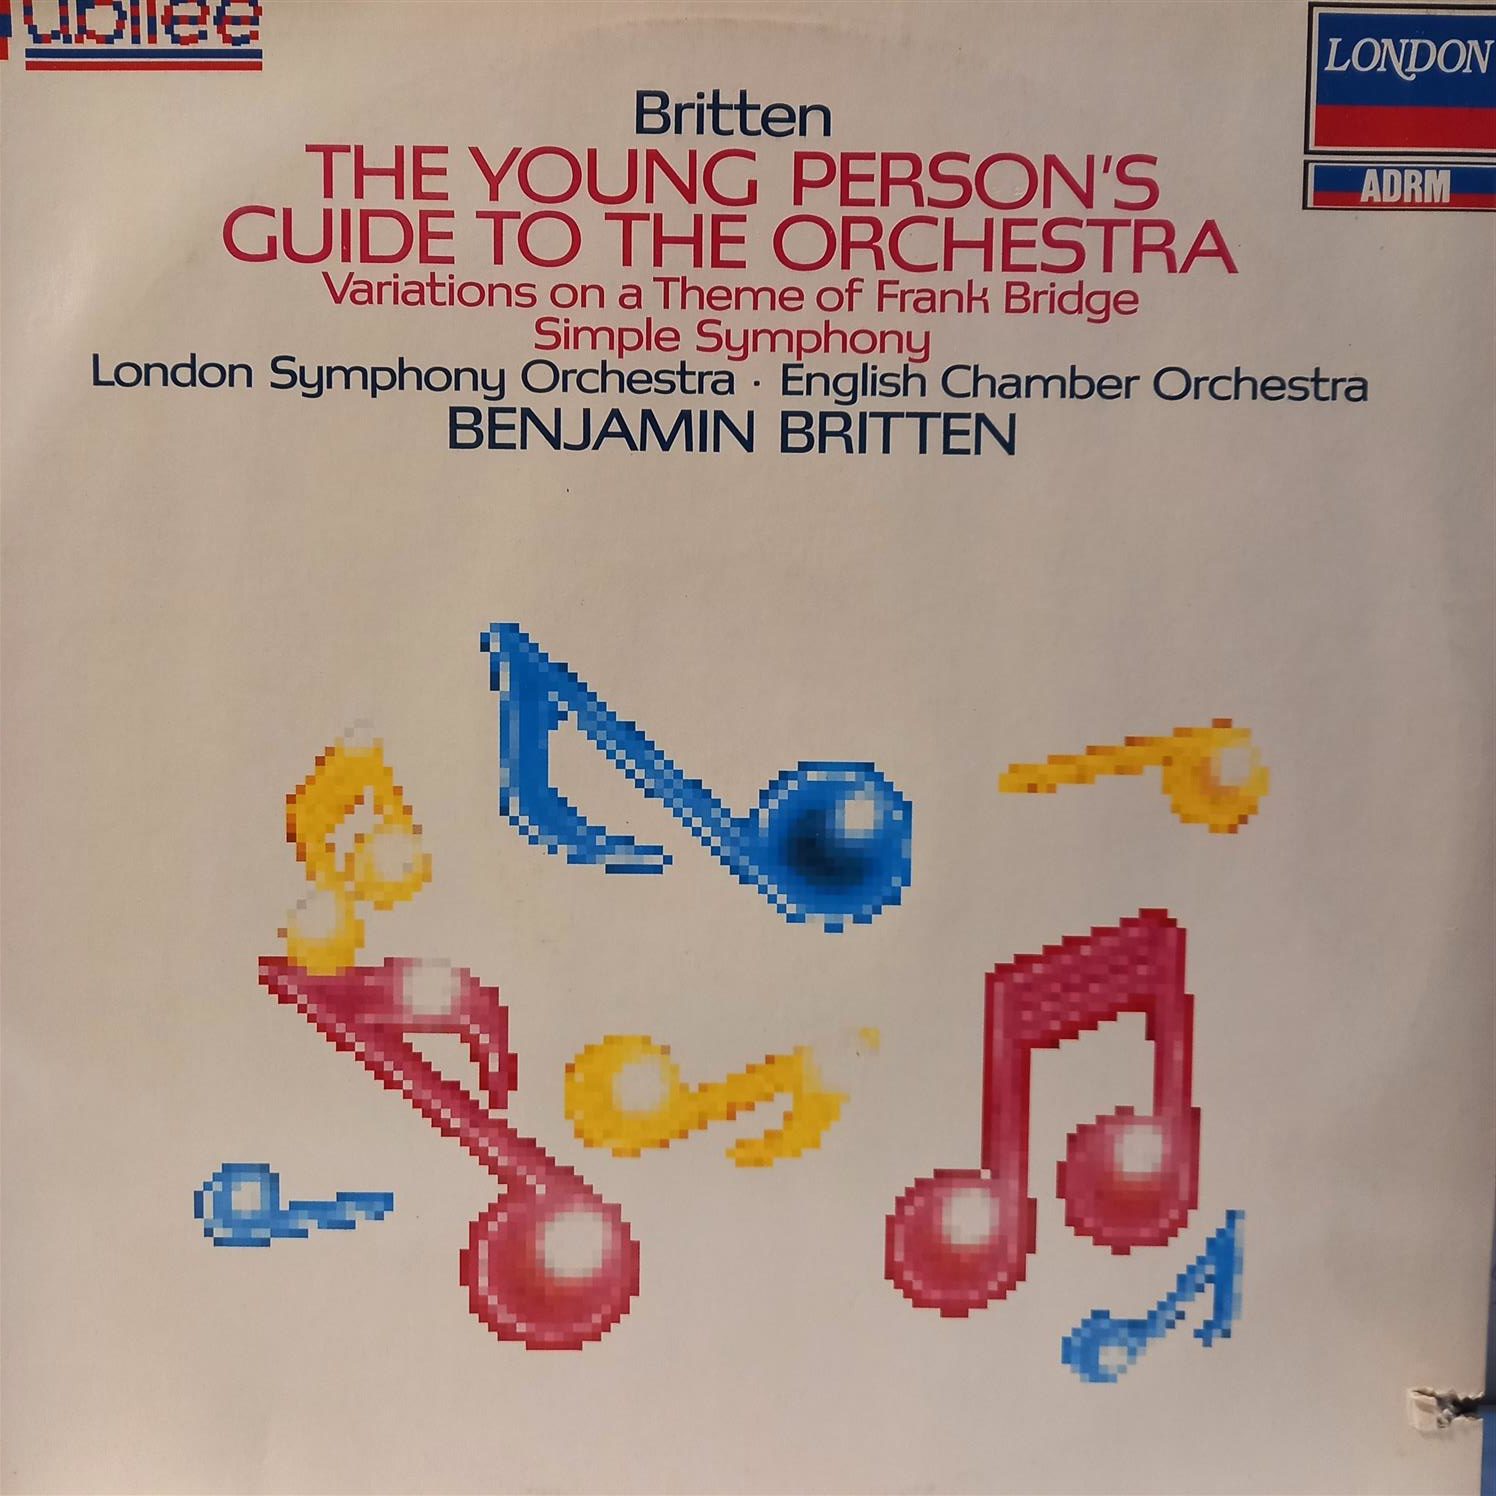 BRITTEN – THE YOUNG PERSON’S GUIDE TO THE ORCHESTRA ON